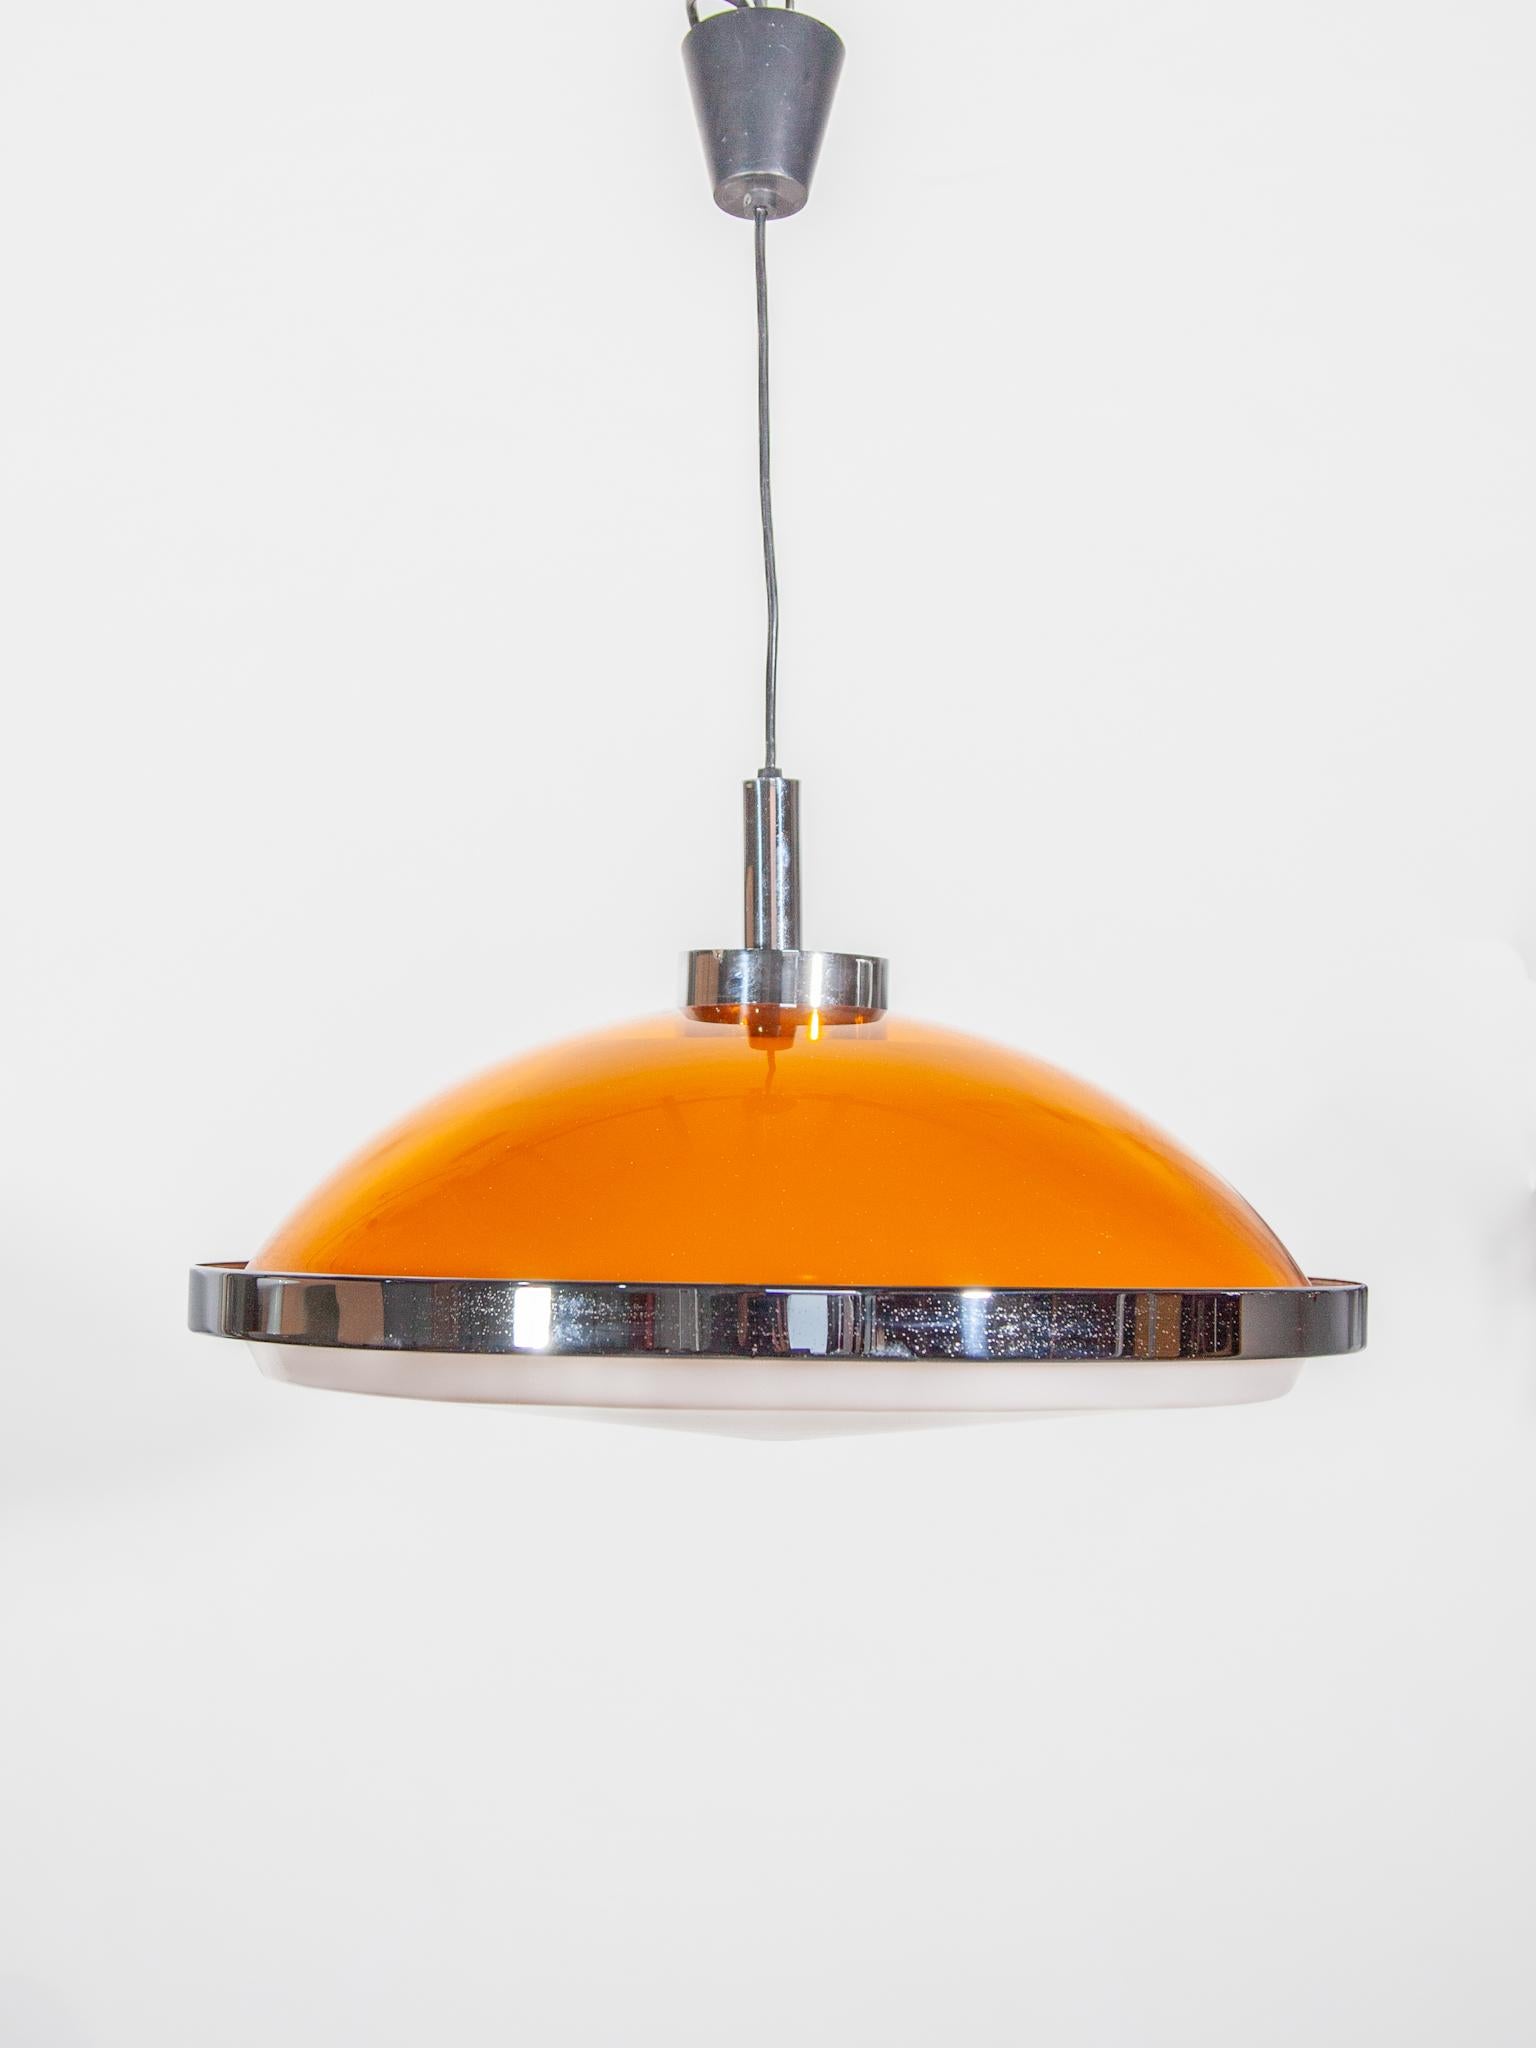 Very rare vintage pendant lamp designed in the space age seventies. This amazing vintage light is made of orange plastic with chrome. It gives a beautiful soft and warm light when it lit on. It's retro atomic looks, and beautiful ambient light are